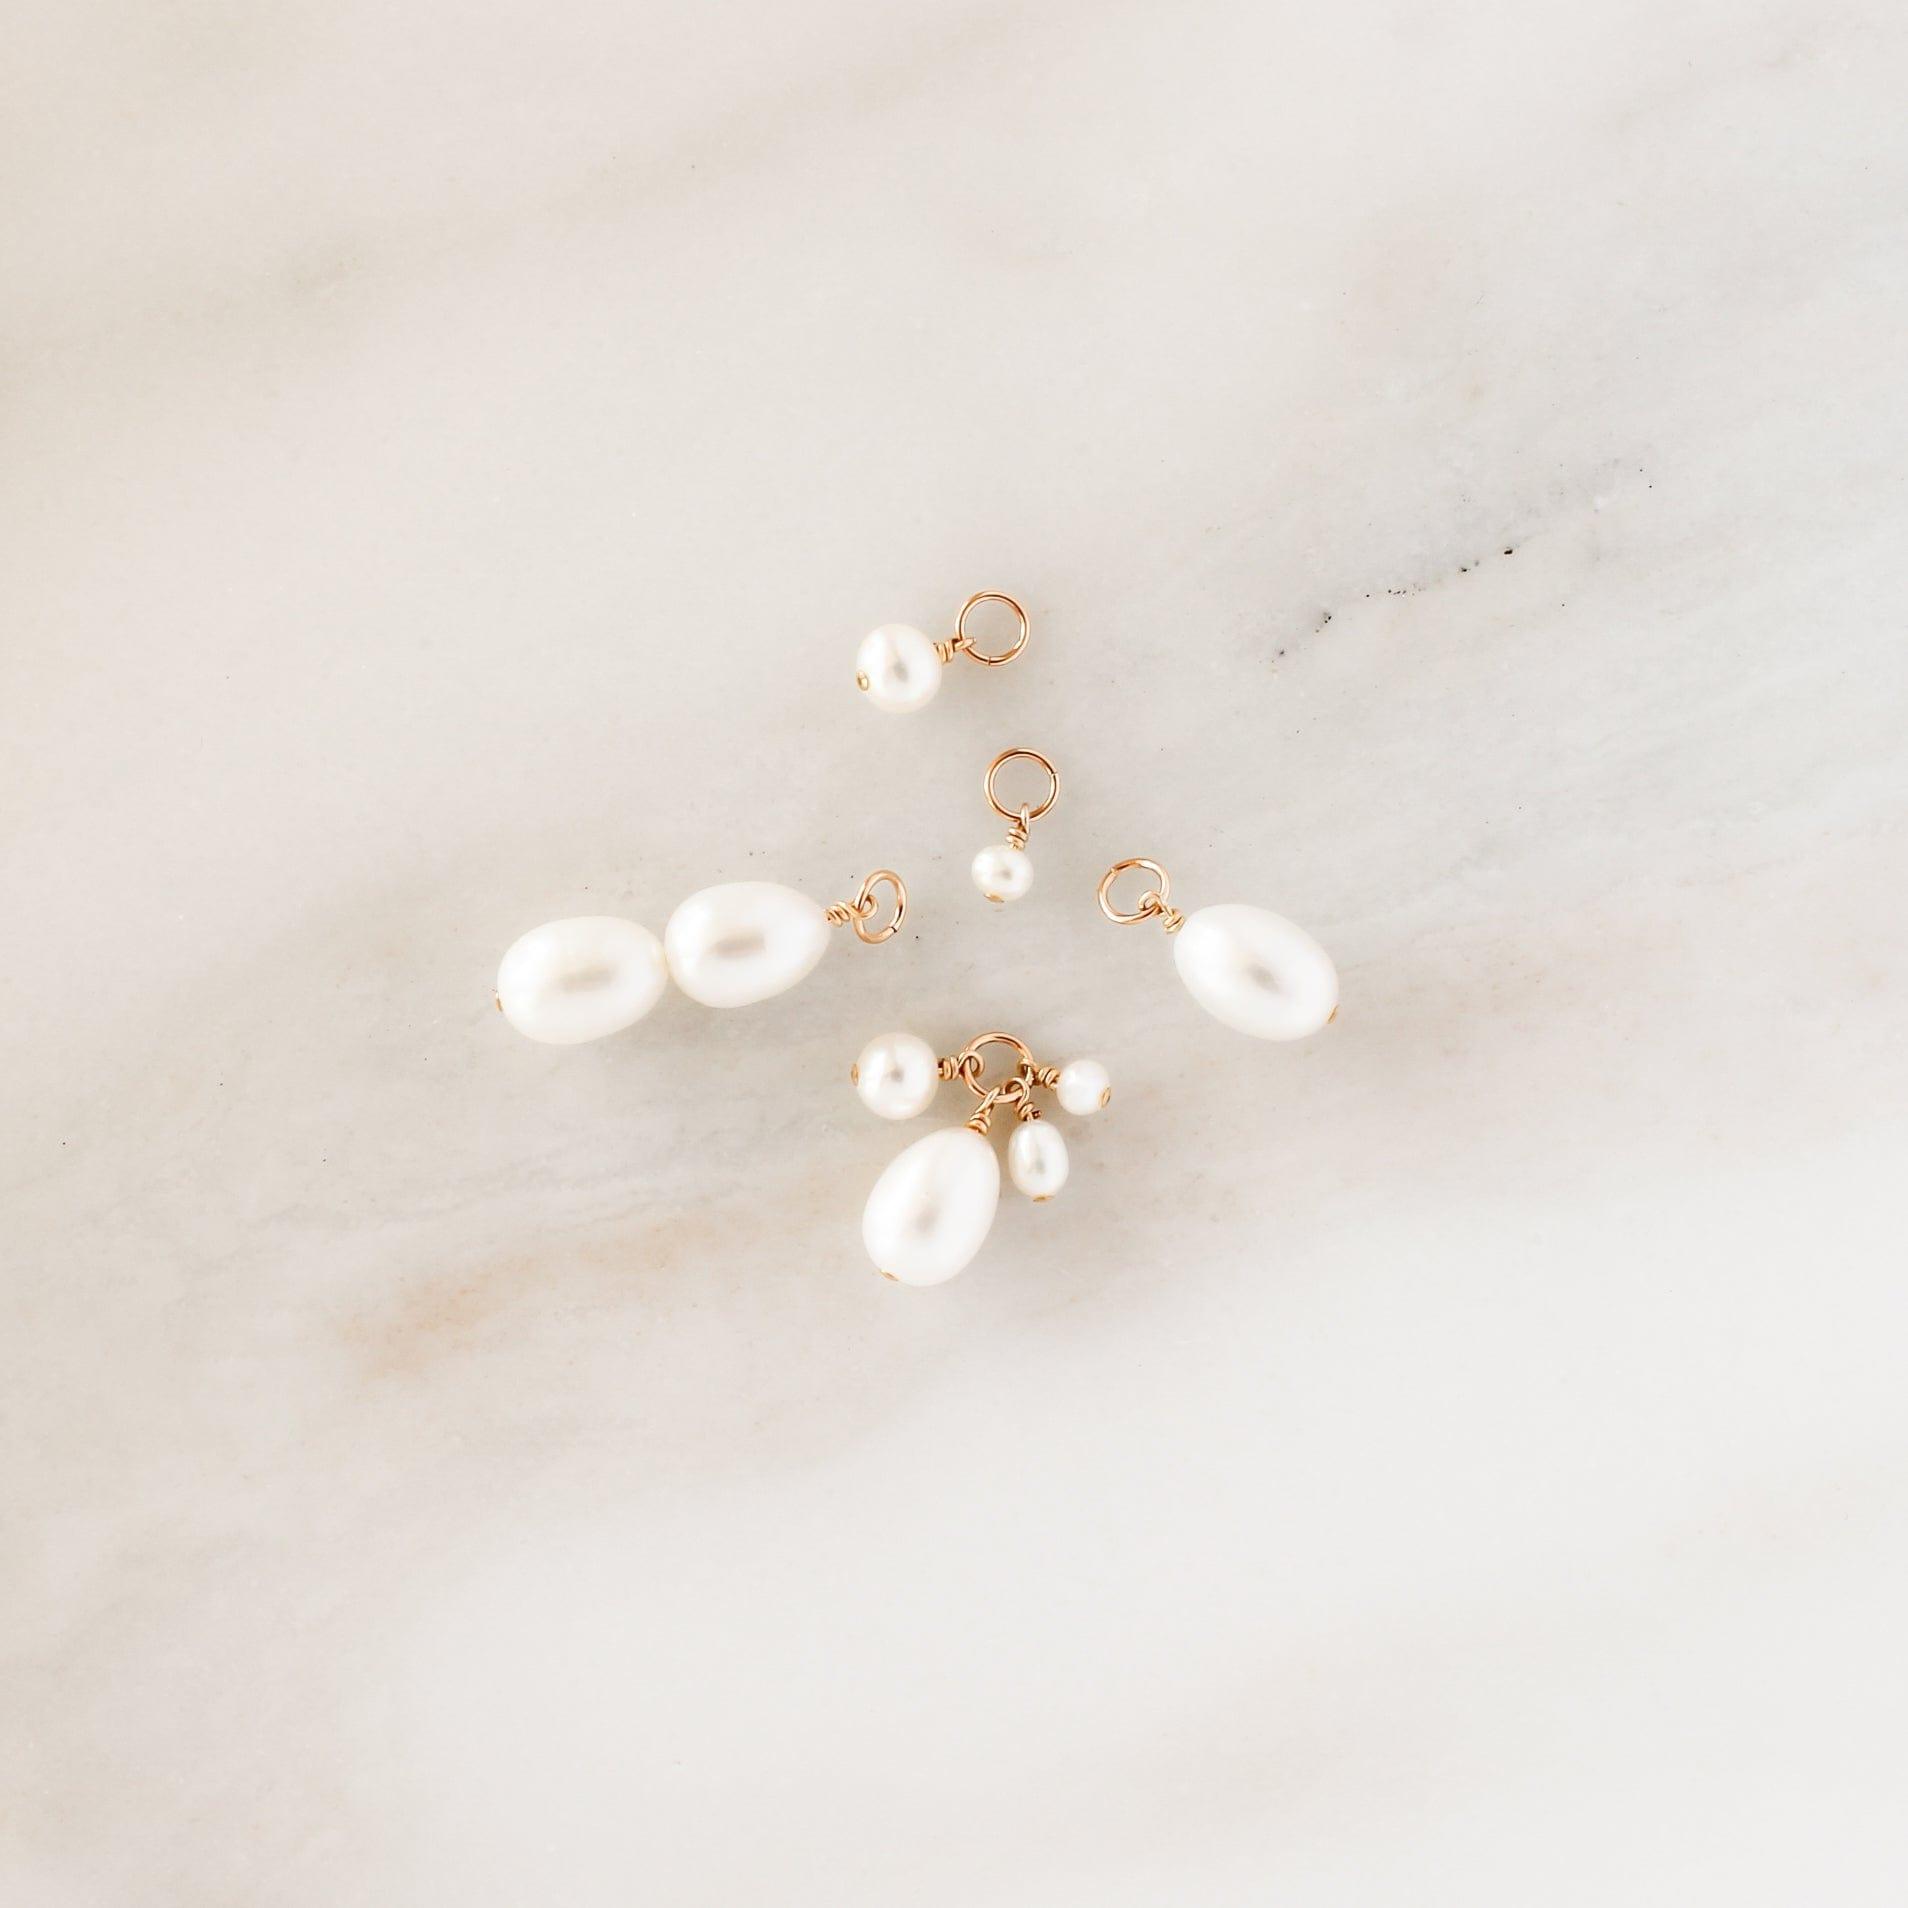 Verona Pearl Cluster Charm • Add On - Nolia Jewelry - Meaningful + Sustainably Handcrafted Jewelry